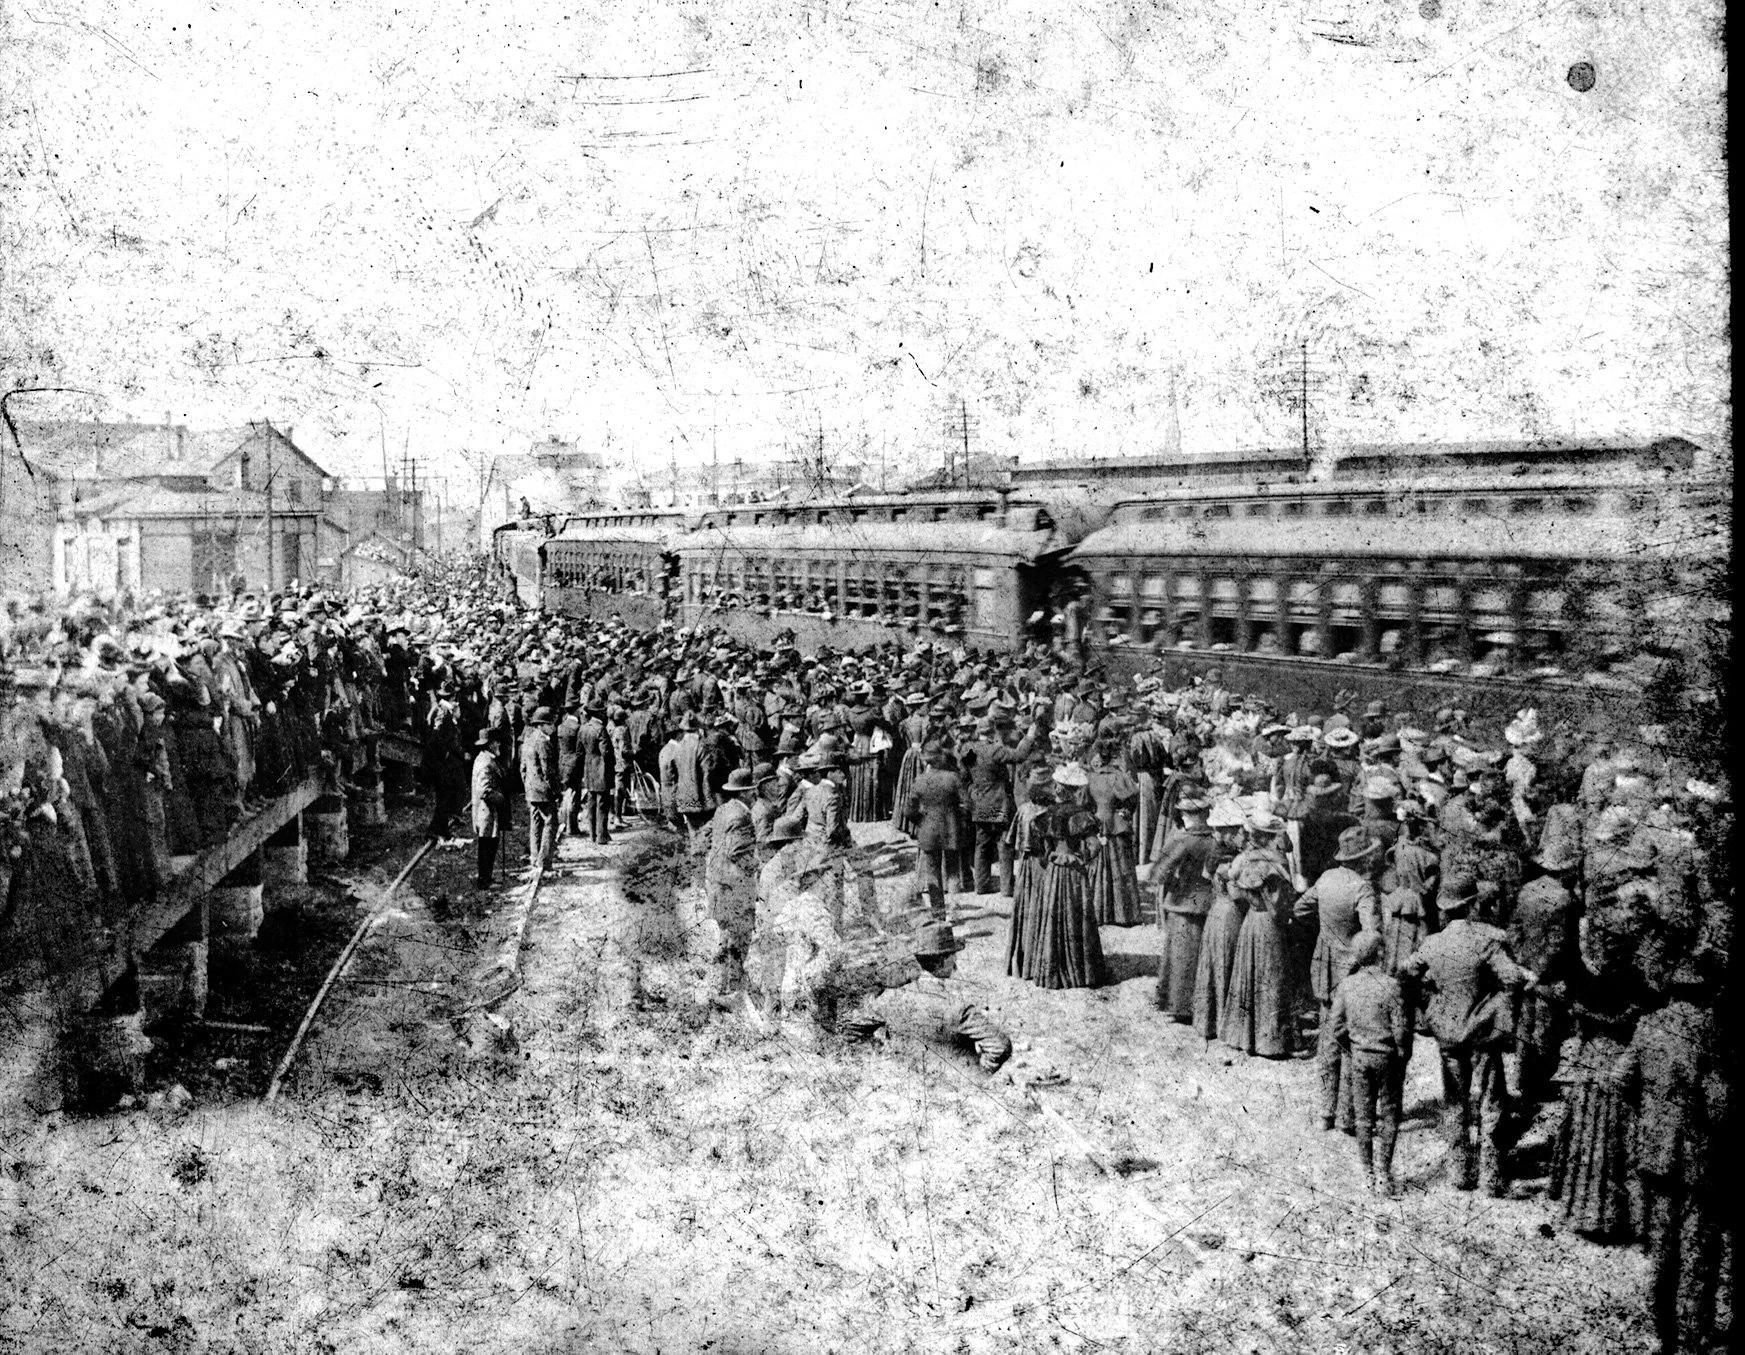 Photo of a very large crowd, gathered around a train